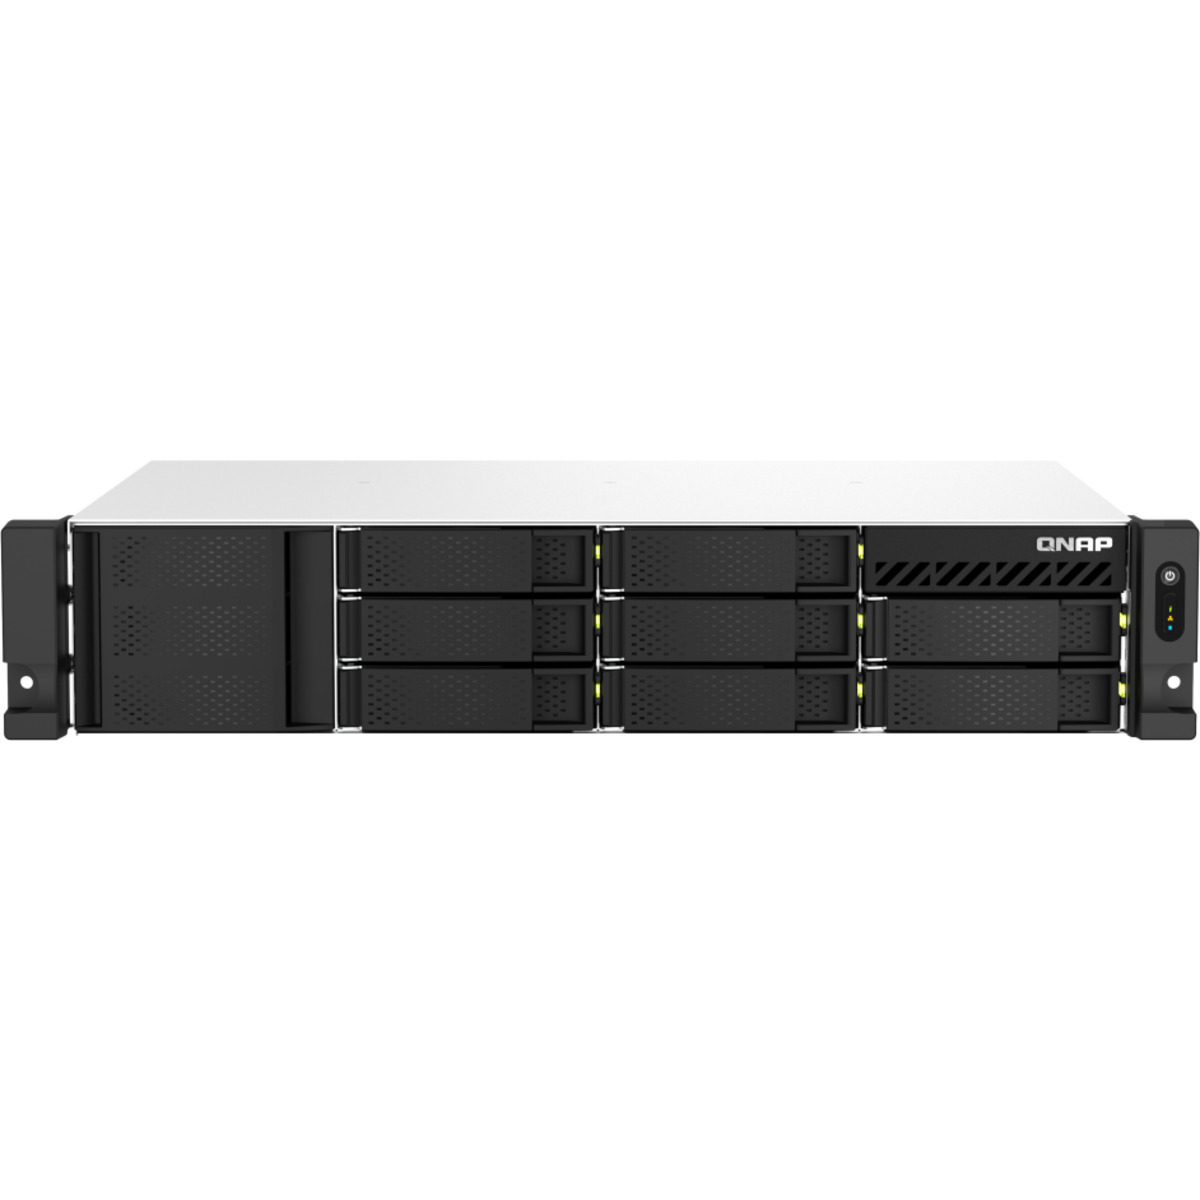 buy QNAP TS-873AeU-RP 176tb RackMount NAS - Network Attached Storage Device 8x22000gb Western Digital Red Pro WD221KFGX 3.5 7200rpm SATA 6Gb/s HDD NAS Class Drives Installed - Burn-In Tested - FREE RAM UPGRADE - nas headquarters buy network attached storage server device das new raid-5 free shipping usa spring sale TS-873AeU-RP